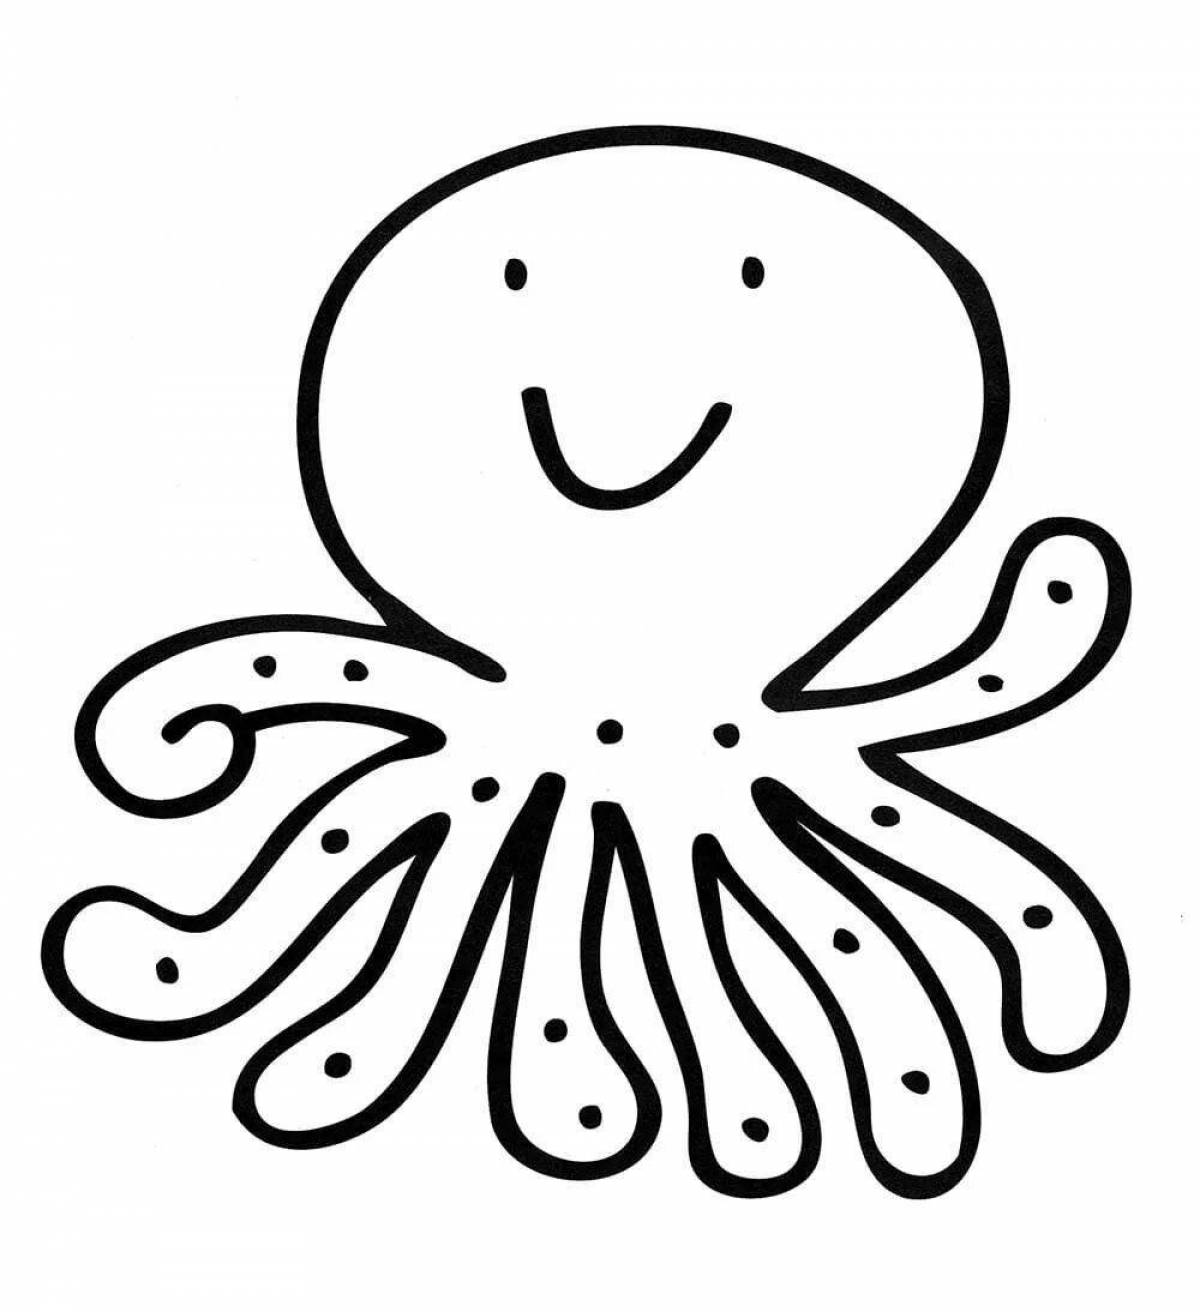 Coloring page nice octopus